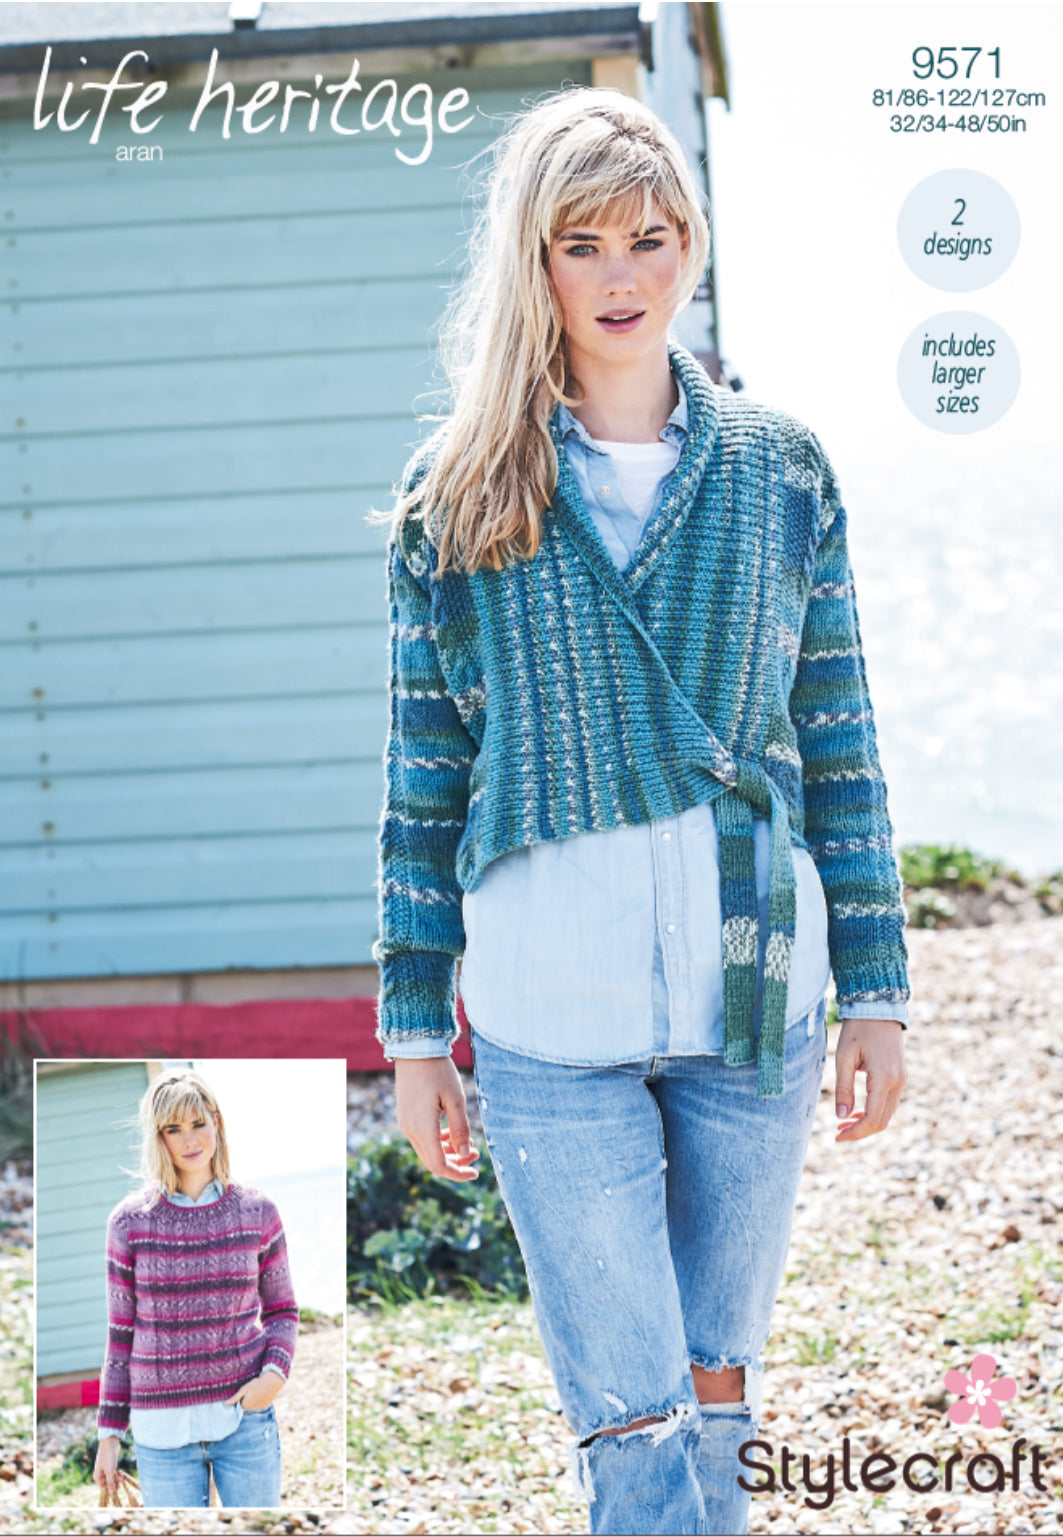 Stylecraft 9571 Moss Stitch and Cable Jumper and Tie Front Jacket in Aran